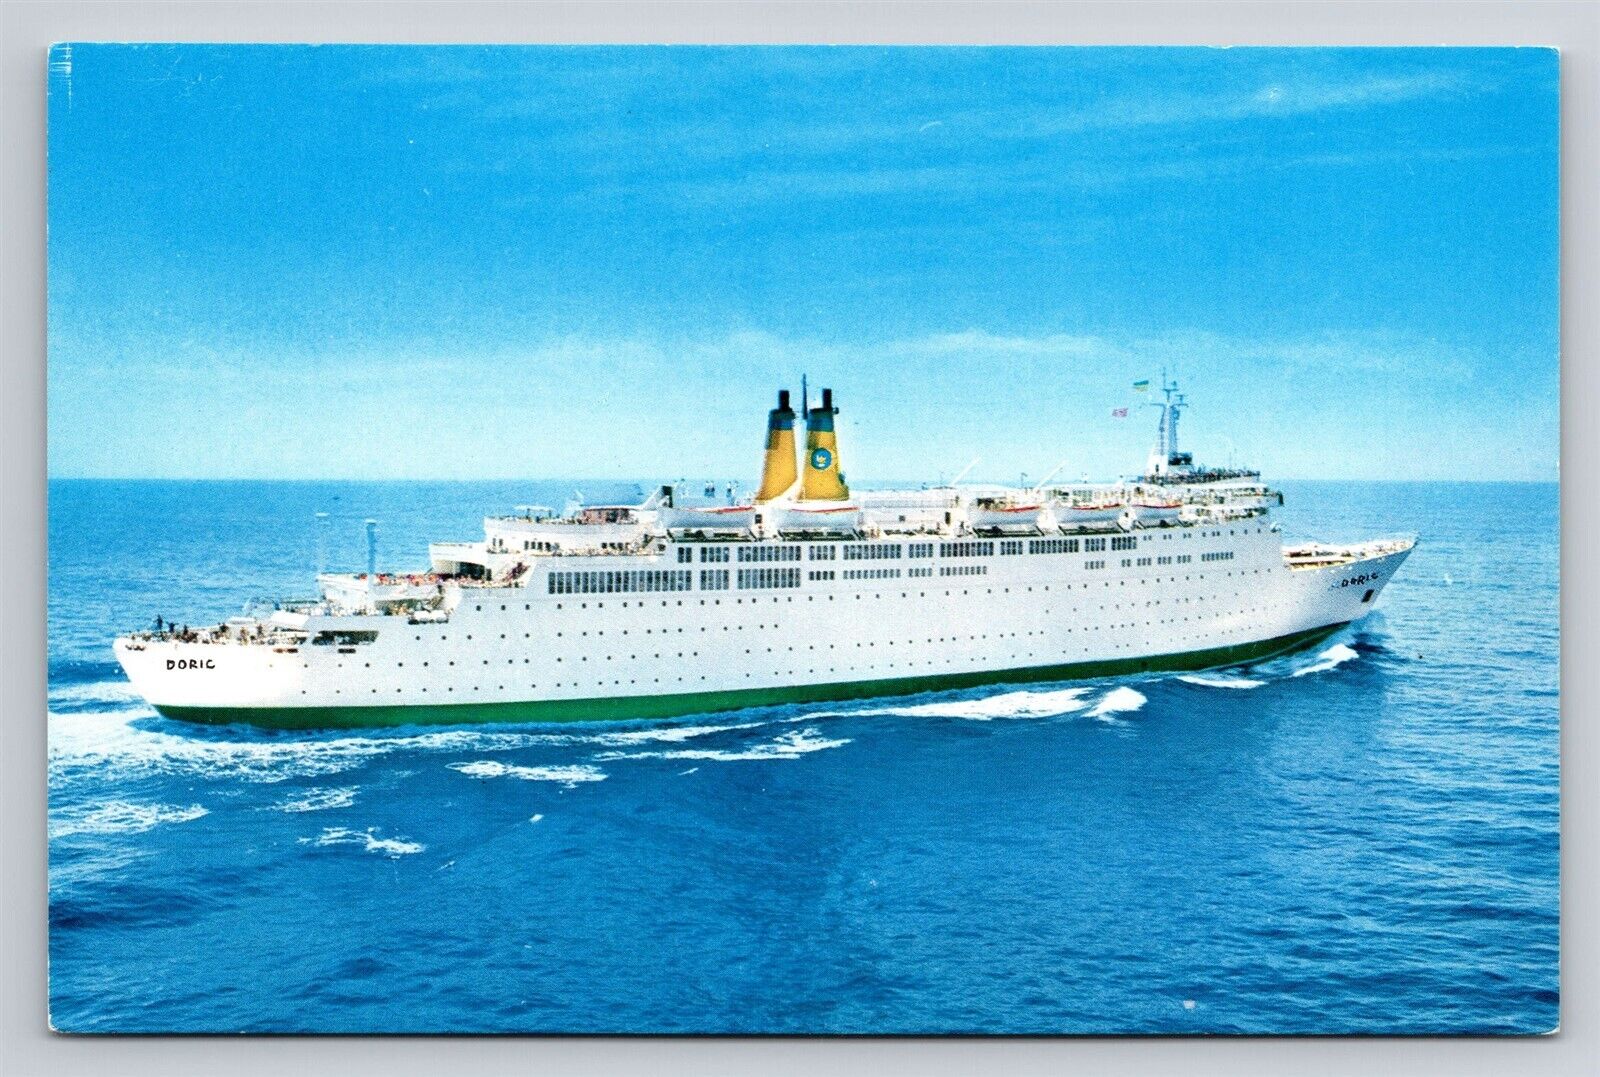 SS Doric Home Lines Cruise Ship Ocean Liner formerly known as Hanseatic Unposted